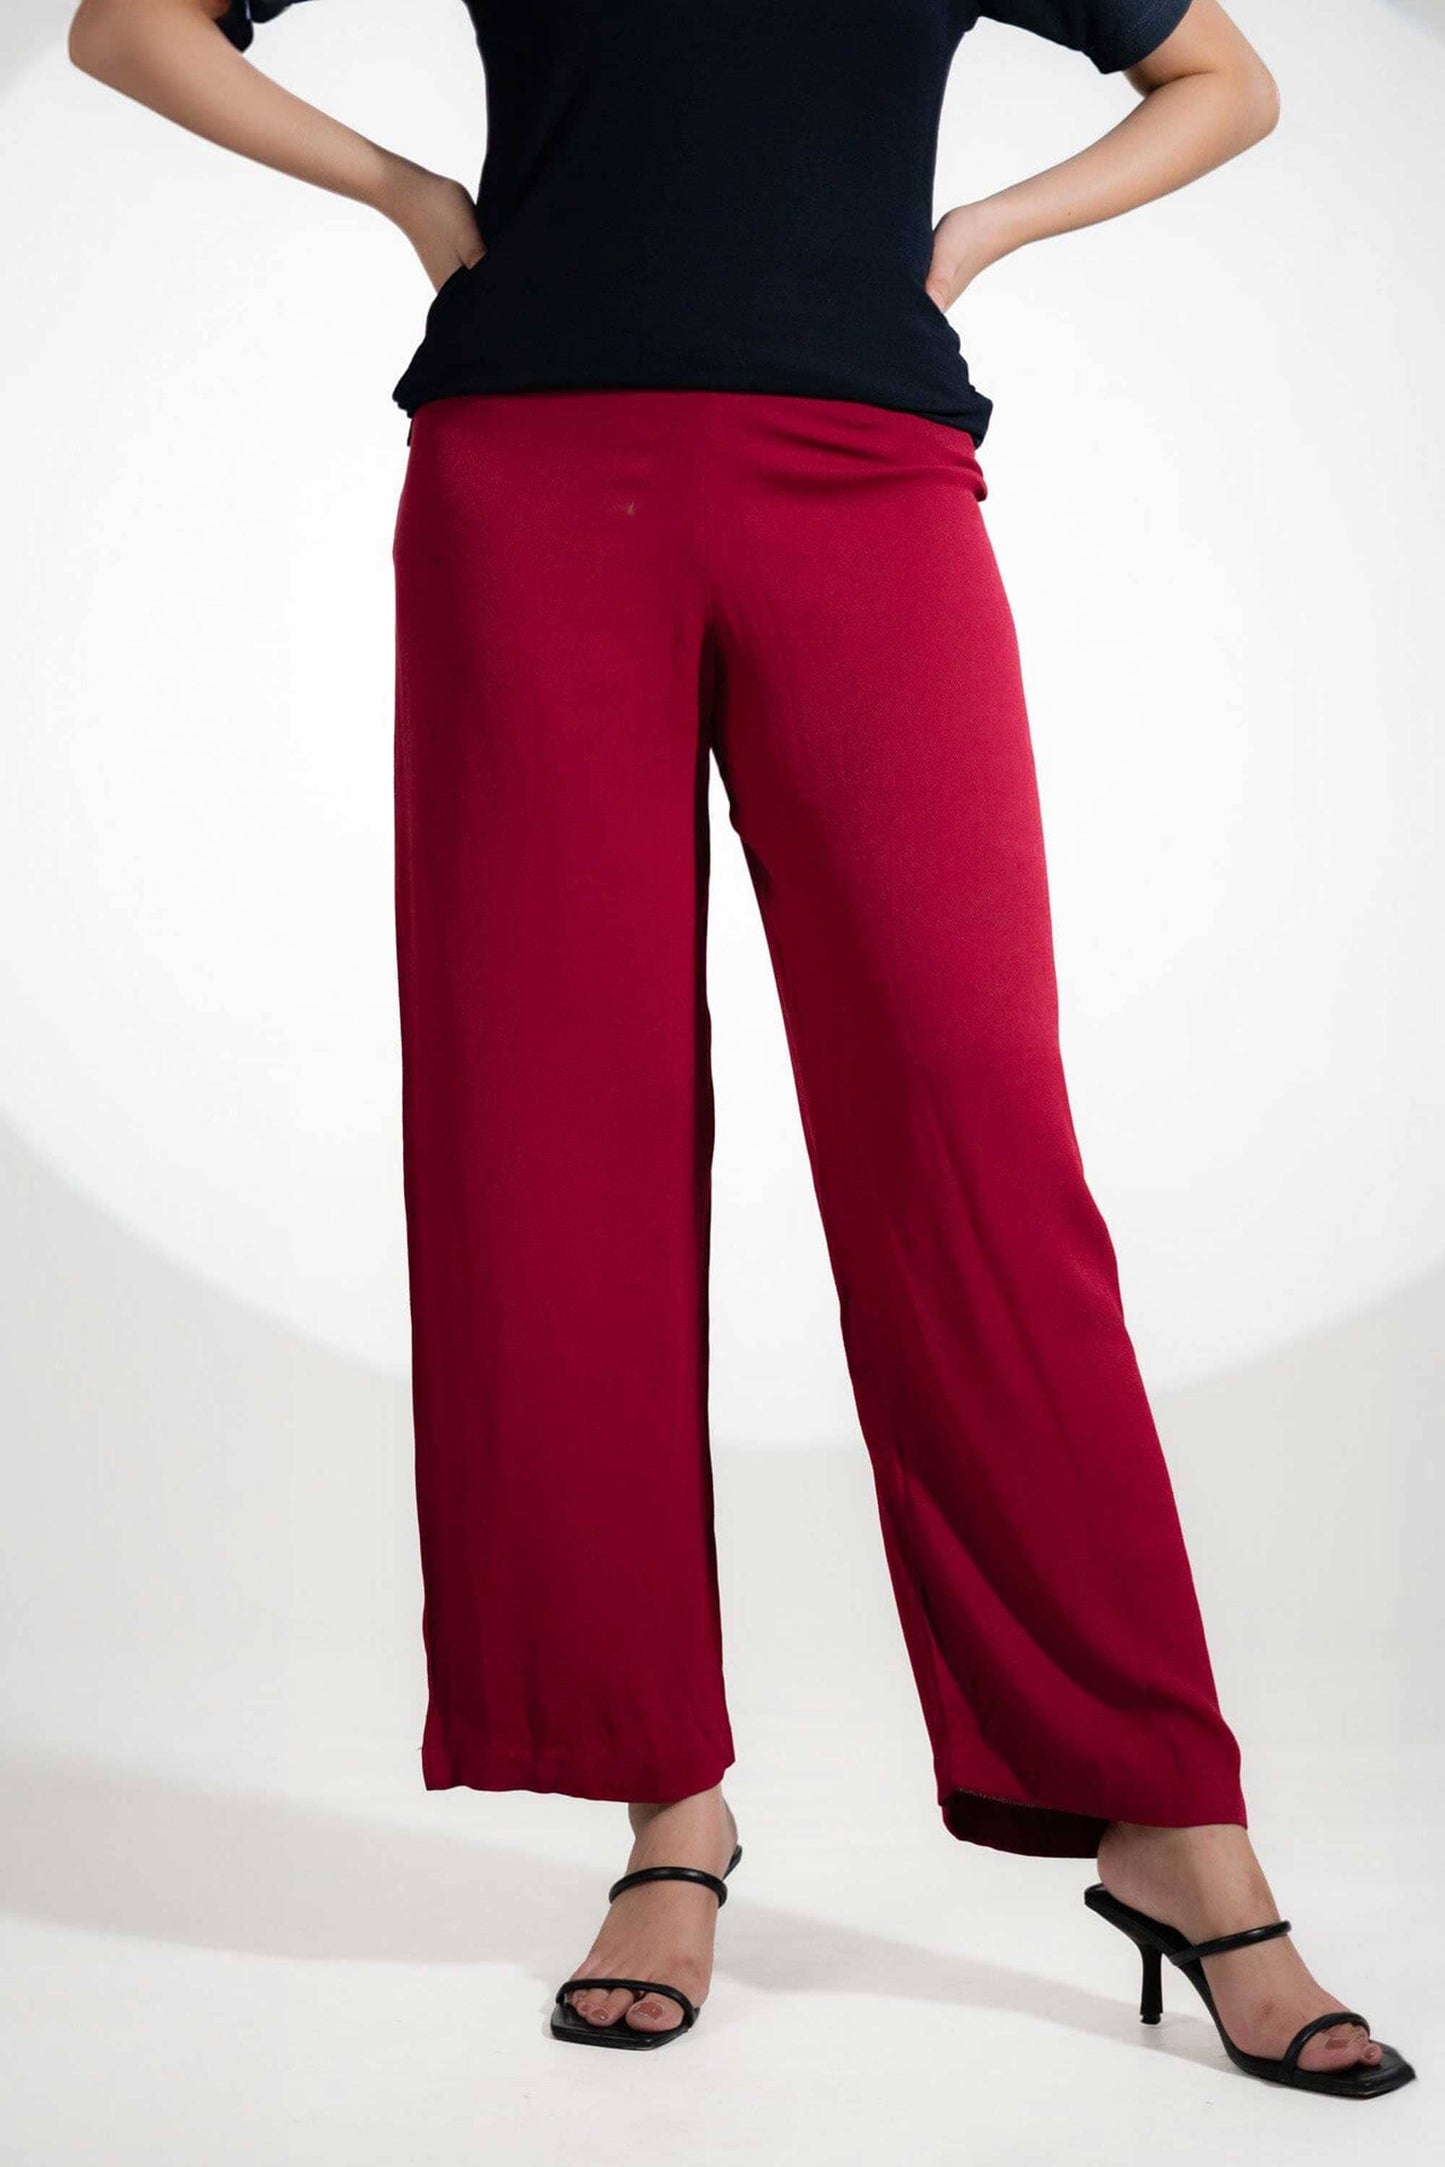 East West Women's Loose Straight Pants